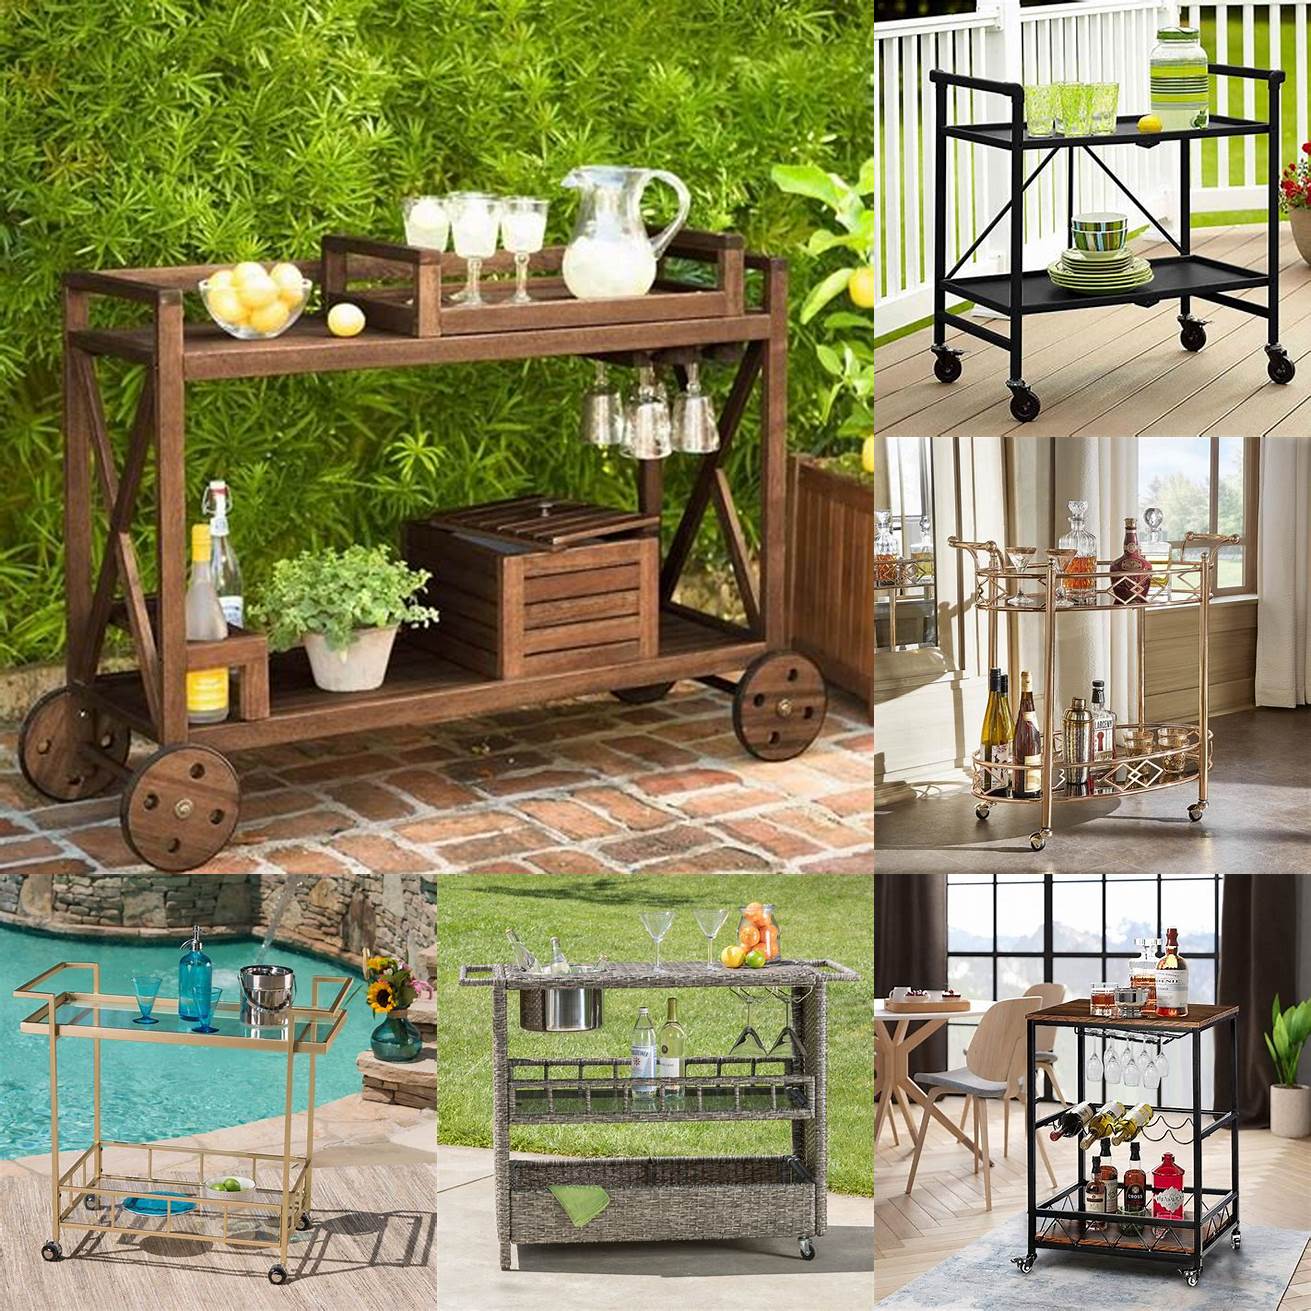 Outdoor bar cart with colorful glassware